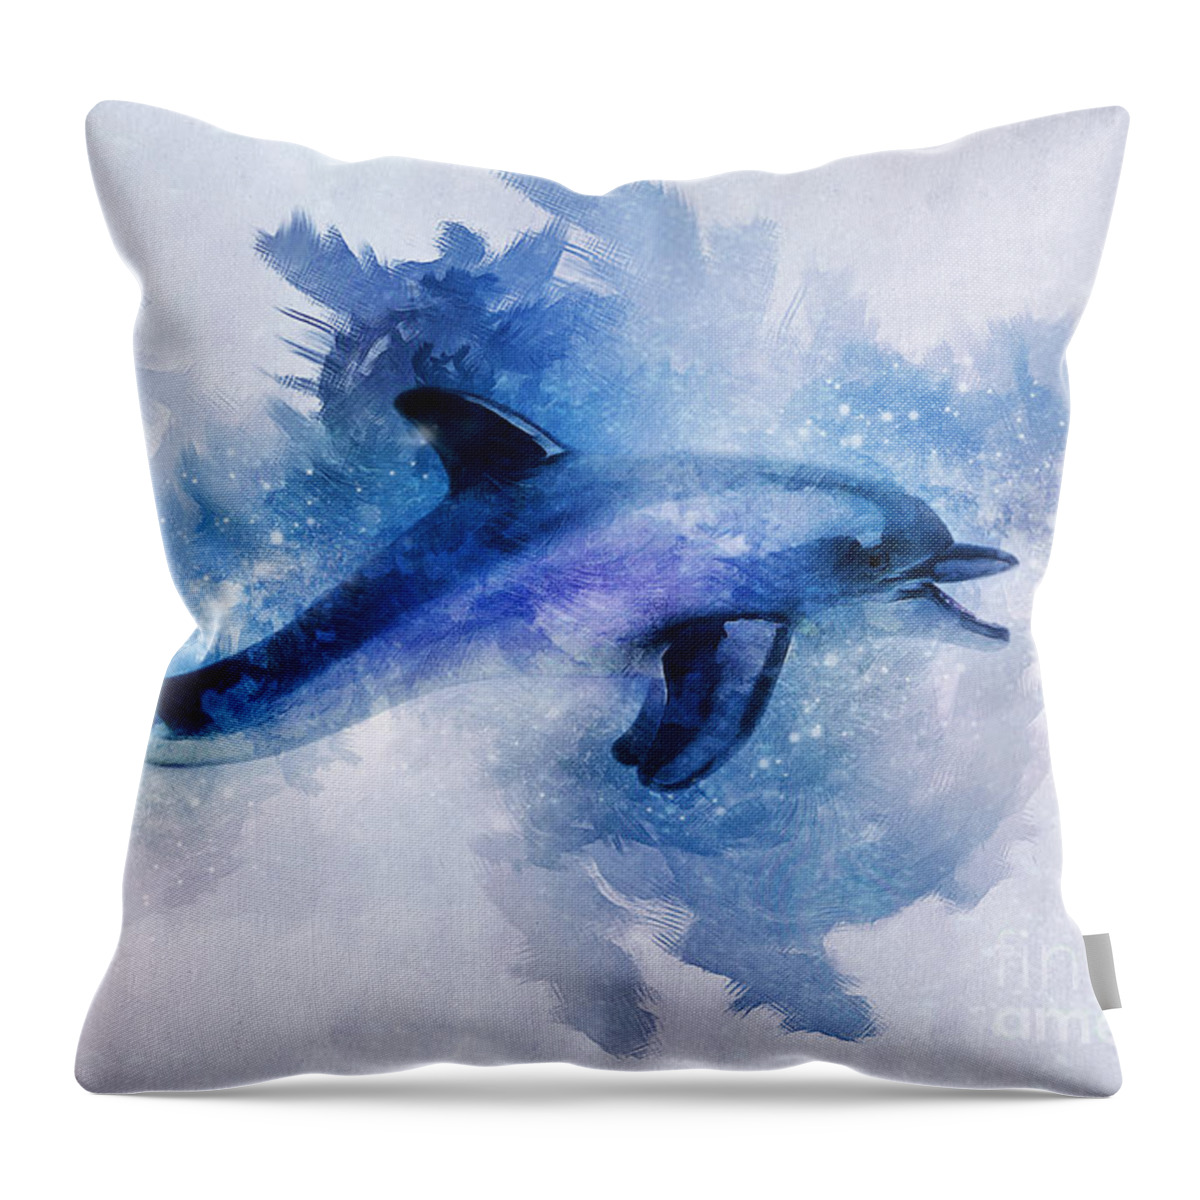 Dolphin Throw Pillow featuring the digital art Dolphins Freedom by Ian Mitchell